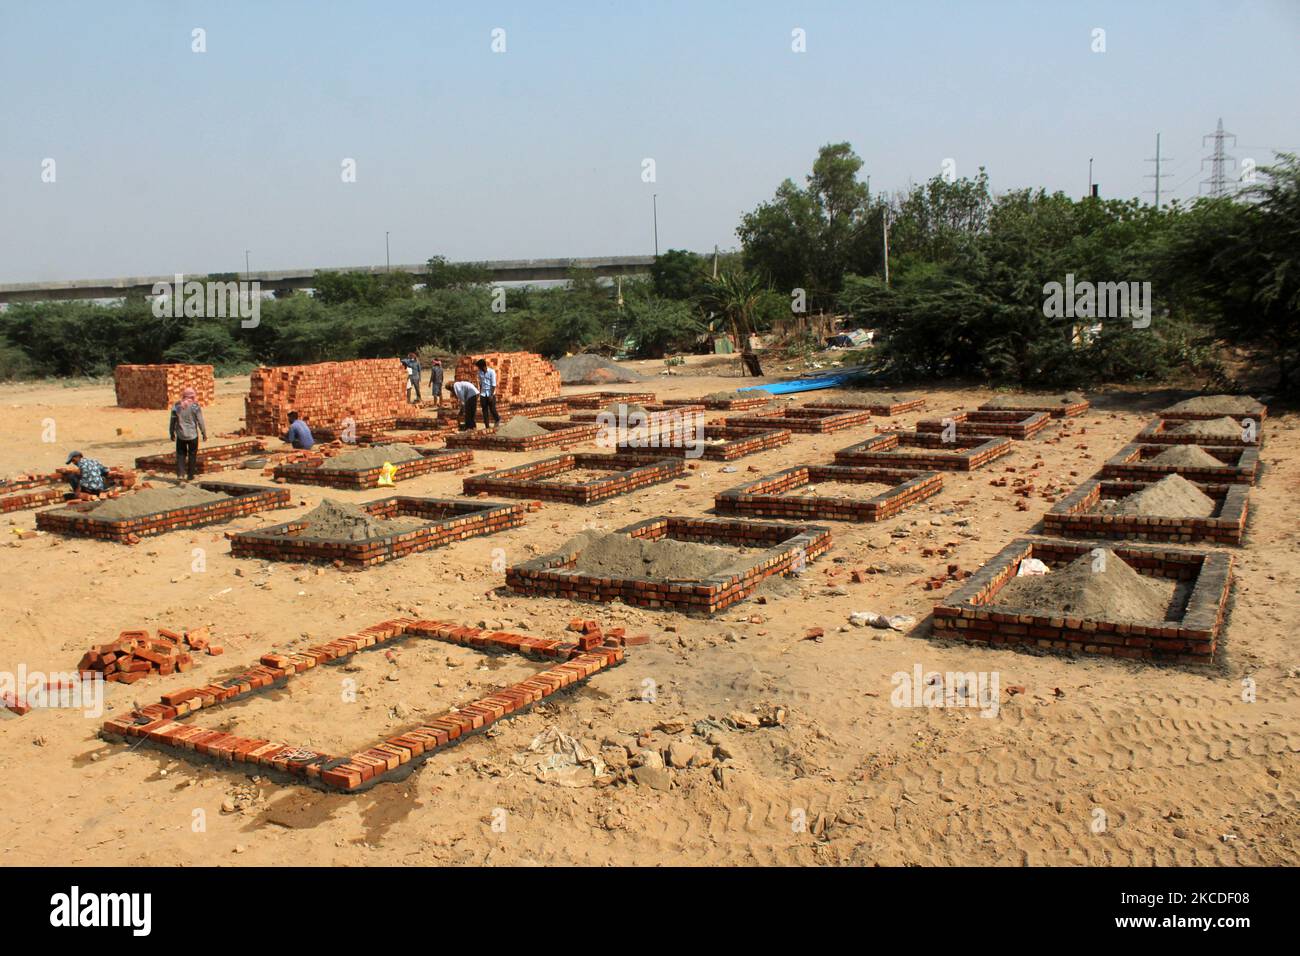 Workers construct new platforms to cremate bodies outside a crematorium, amidst the rising coronavirus cases in New Delhi on April 26, 2021. India recorded over 3.52 lakh new Covid-19 cases in the 24 hours, taking the country’s total infections to over 1.73 crore. With 2,812 new fatalities, the death toll is now over 1.95 lakh. (Photo by Mayank Makhija/NurPhoto) Stock Photo